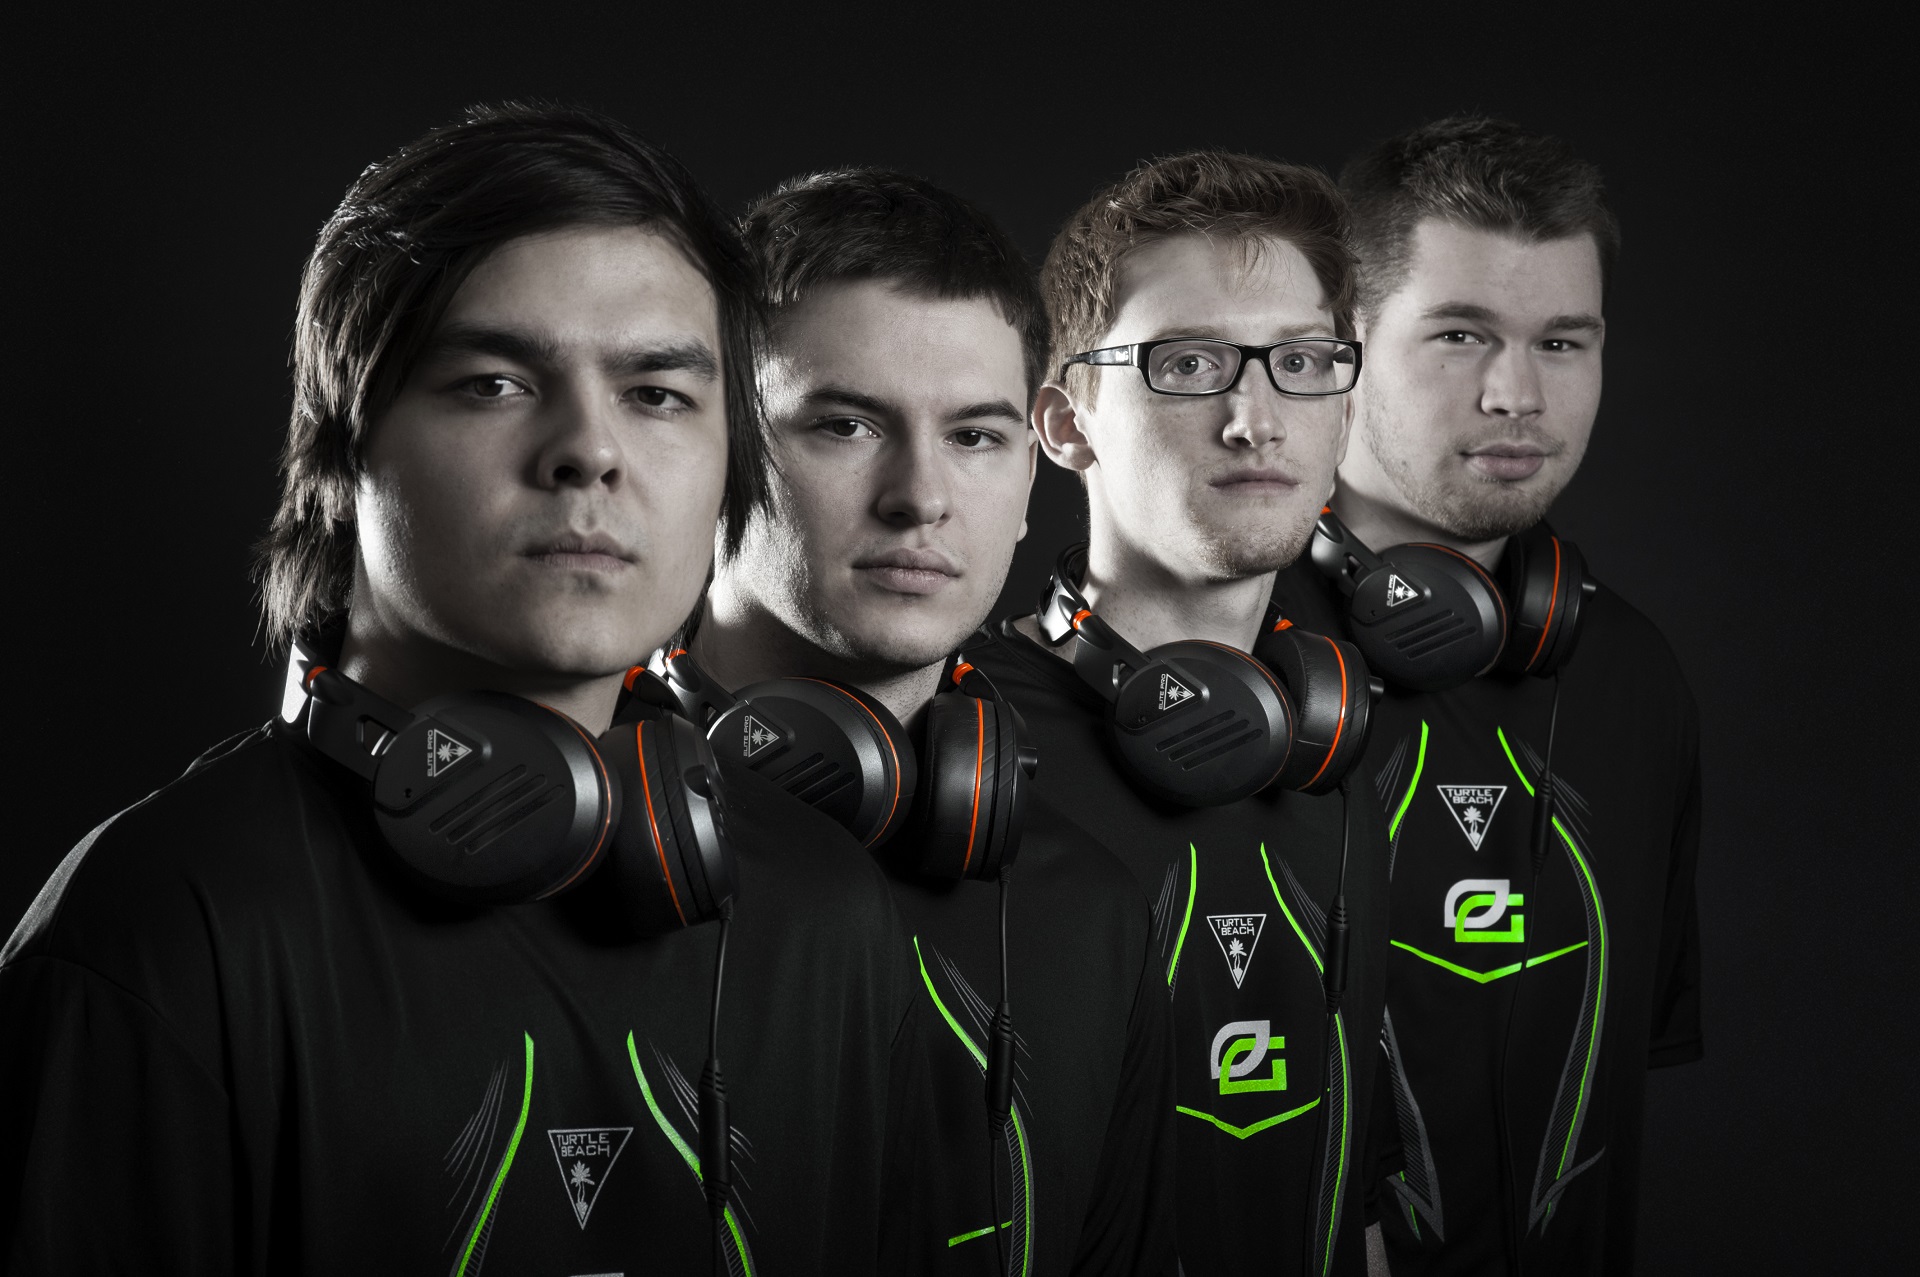 Turtle Beach Release Elite Pro Headset Announce Partnership With Optic ...